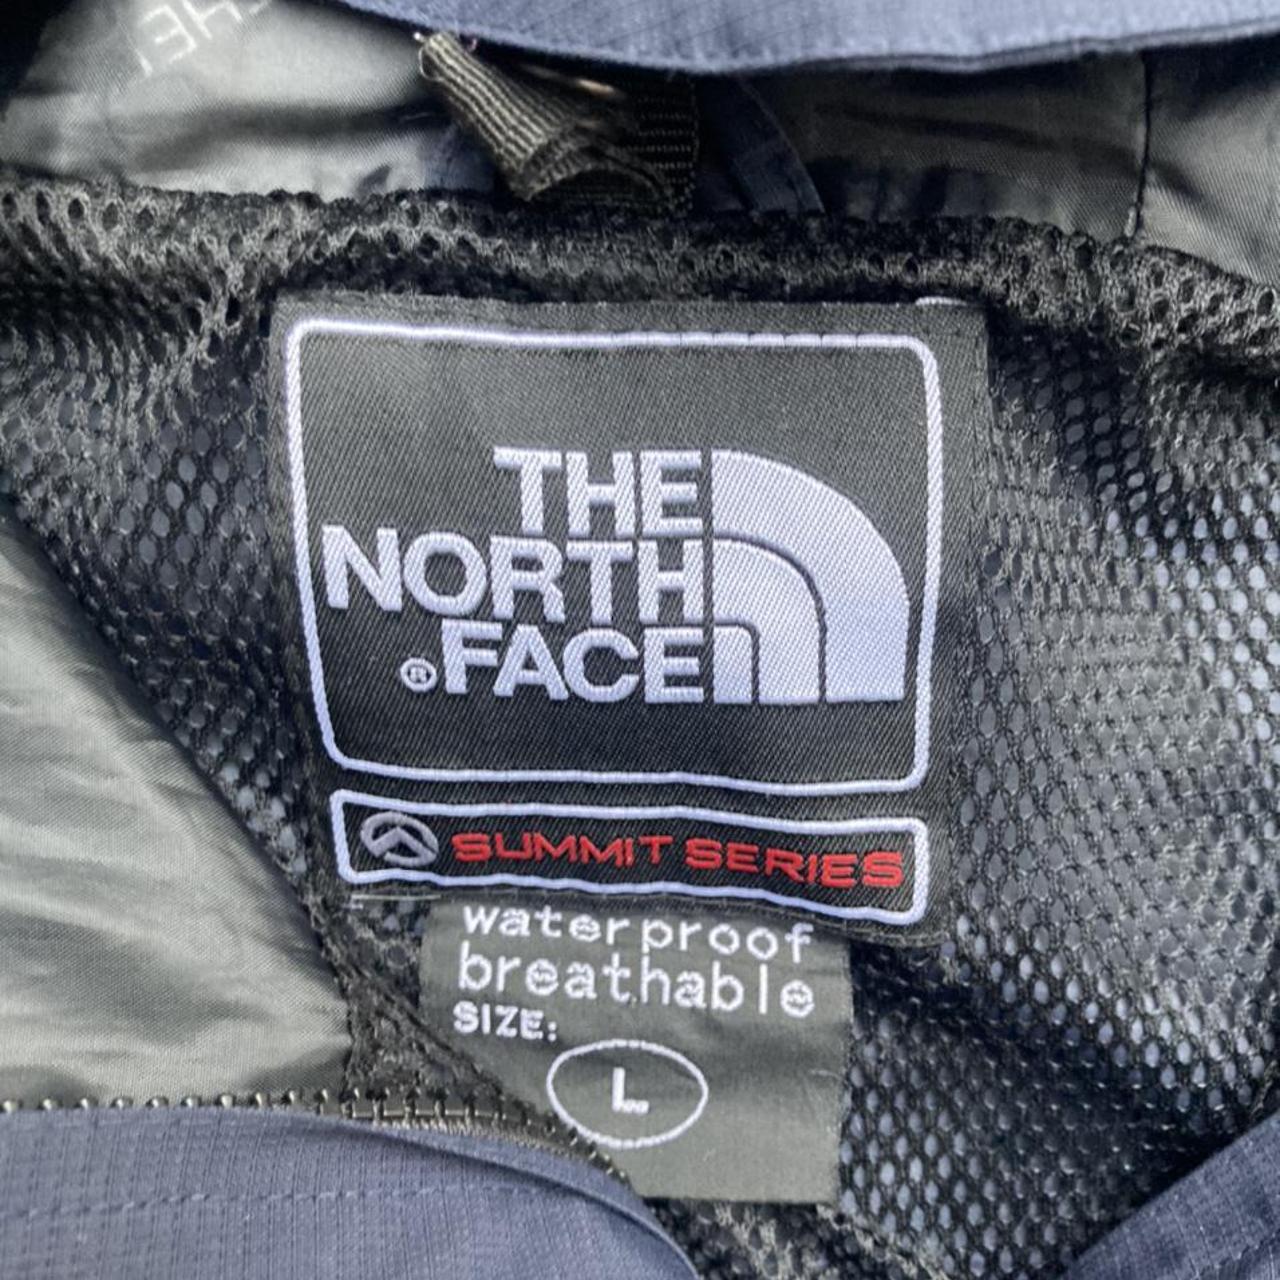 Product Image 3 - Gore-Tex North Face Jacket 🌨☔️💙
Winter